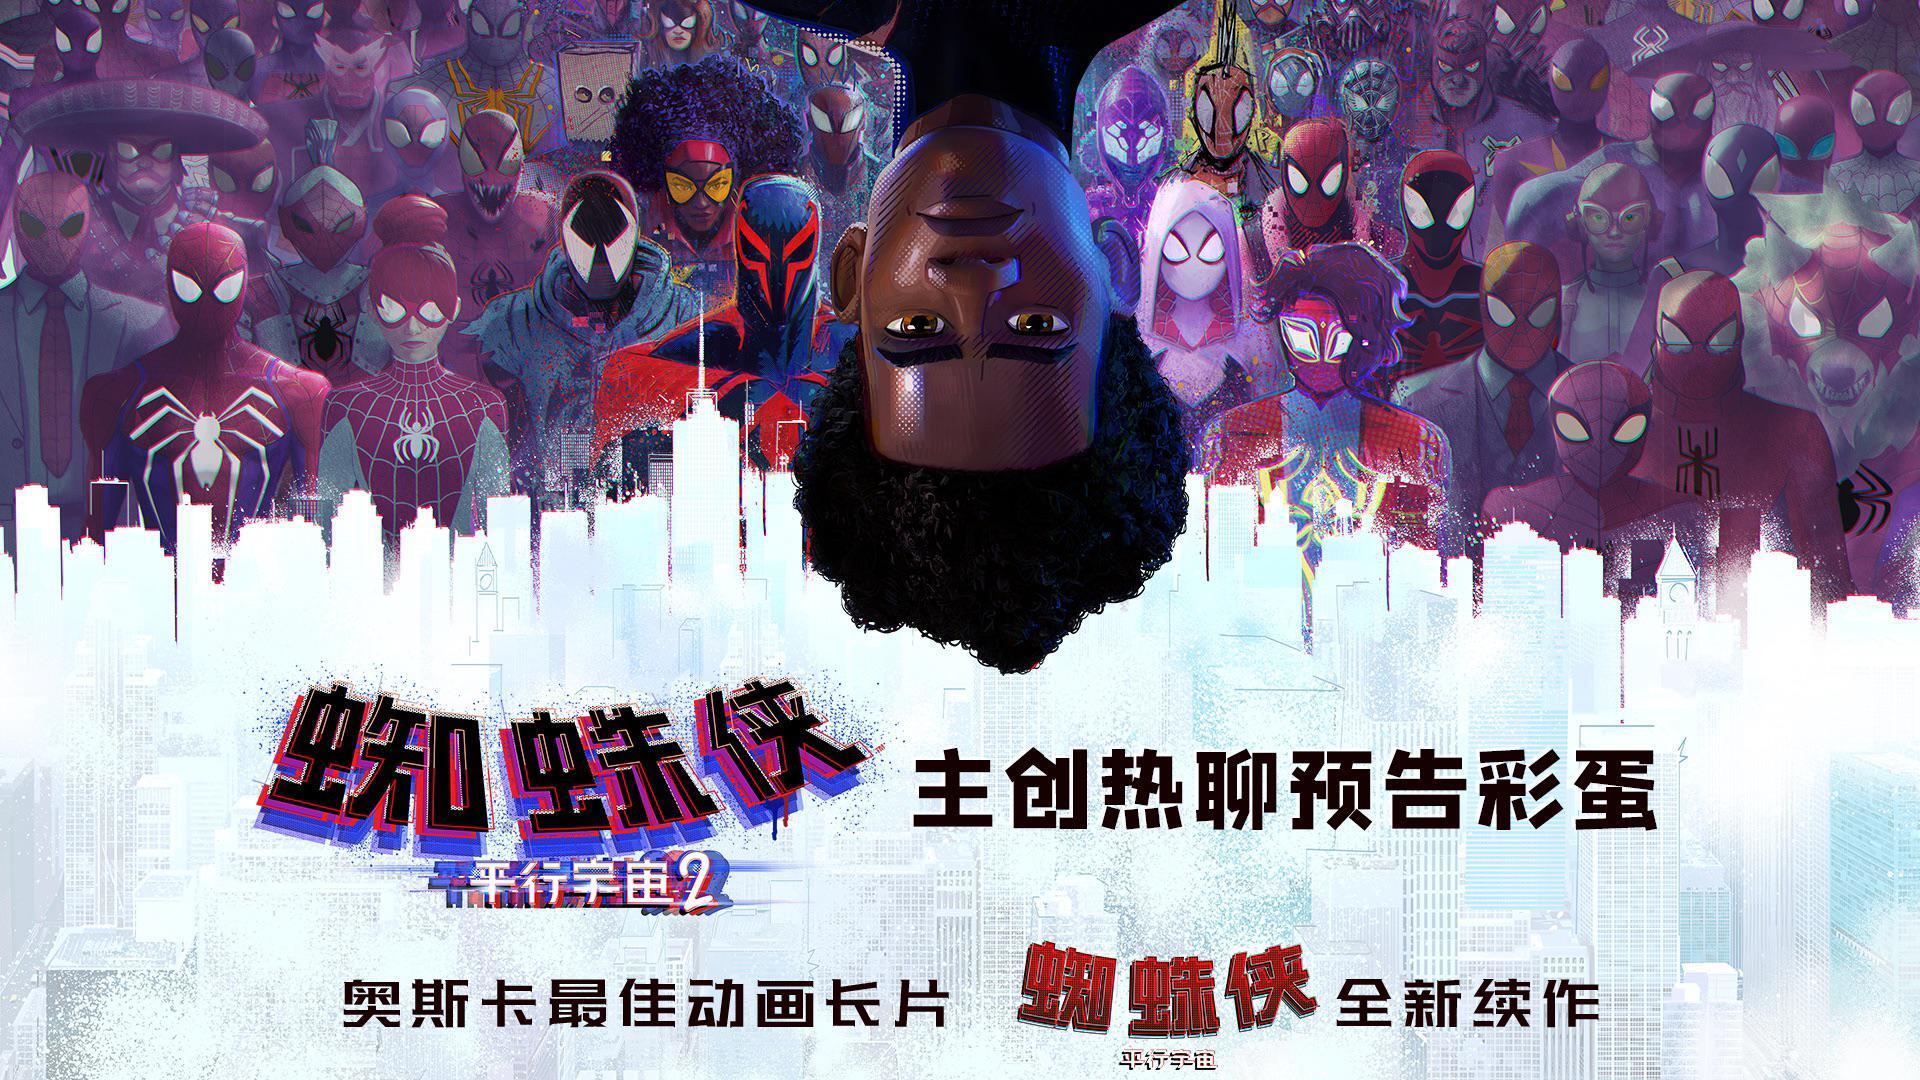 Spider Man: Across The Spider Verse International Poster Adds Even More Spider Heroes